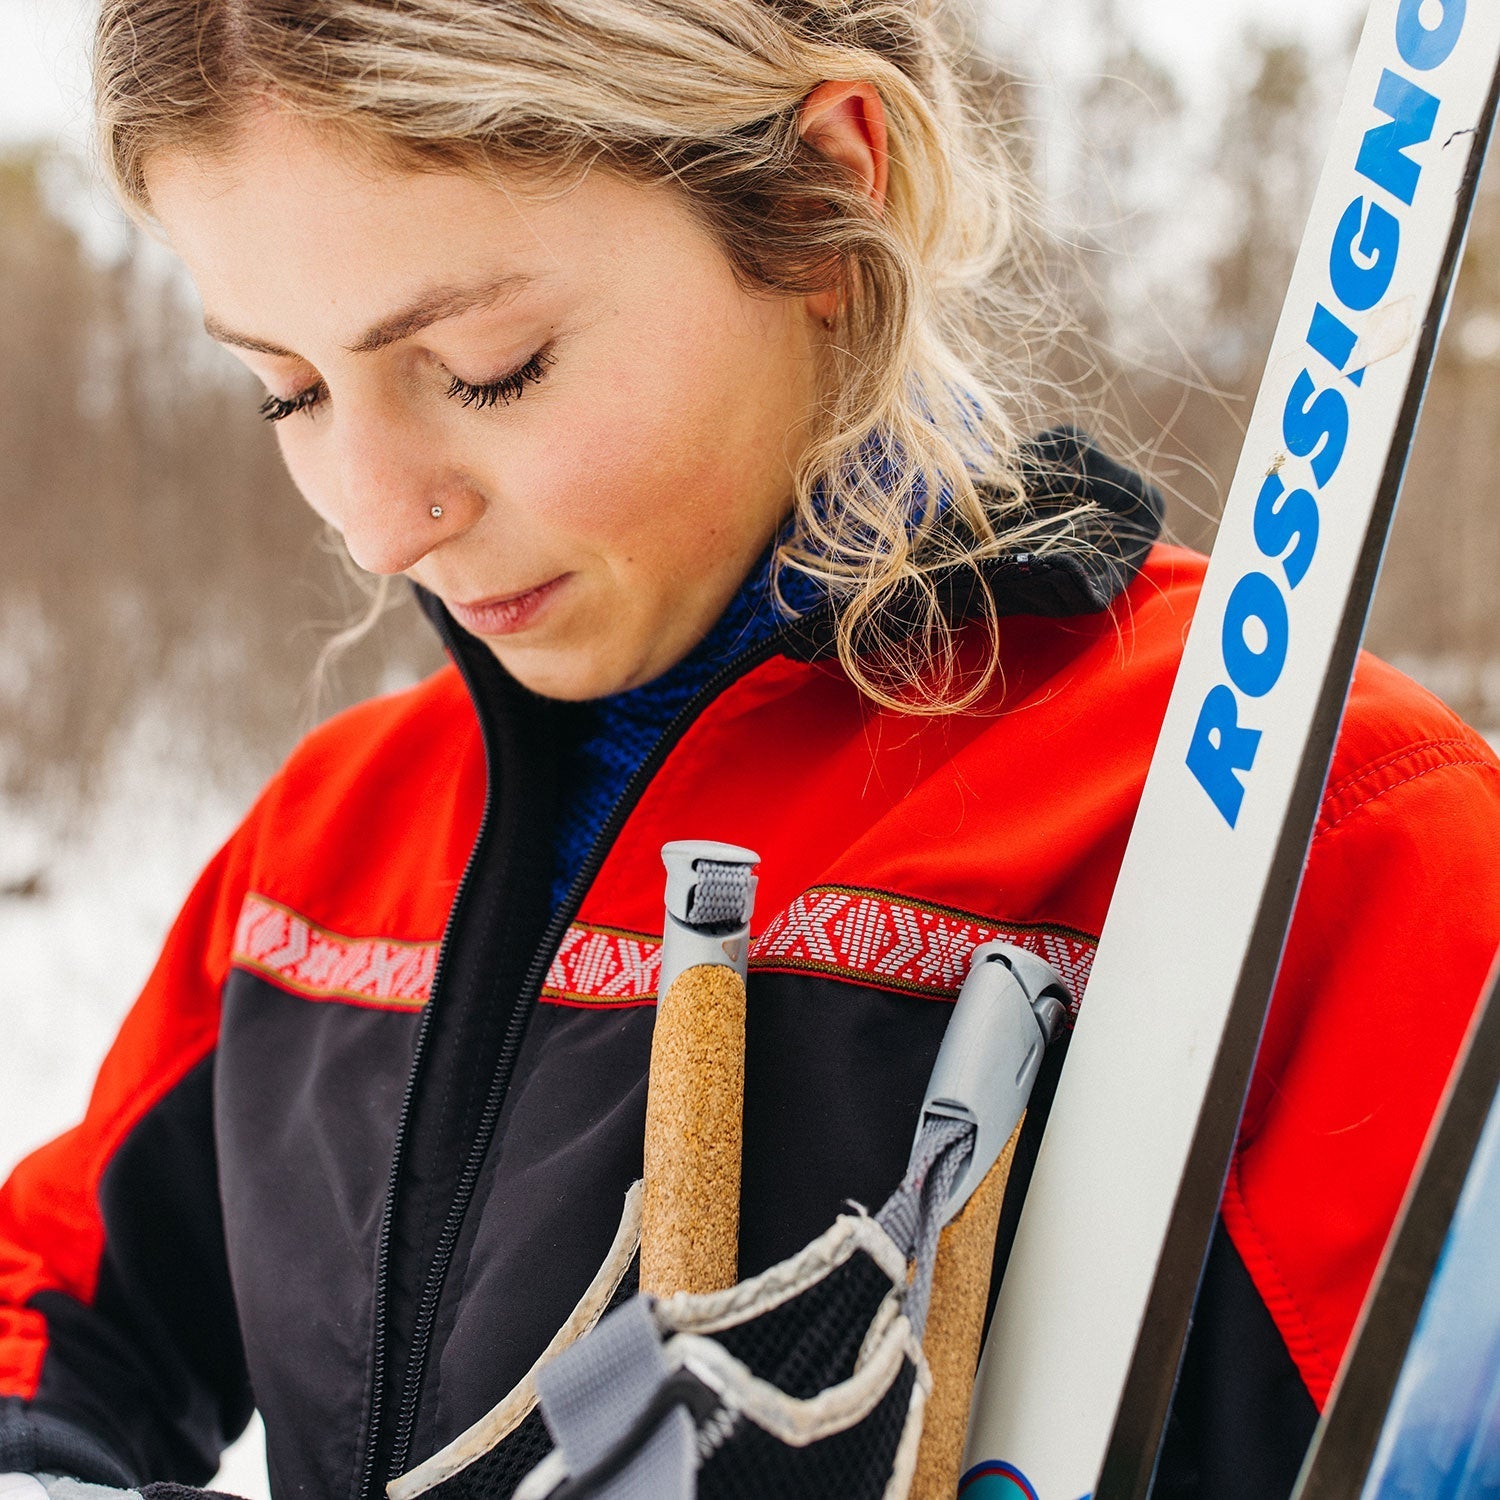 Women's cross-country ski clothing: Nordic ski clothes for women